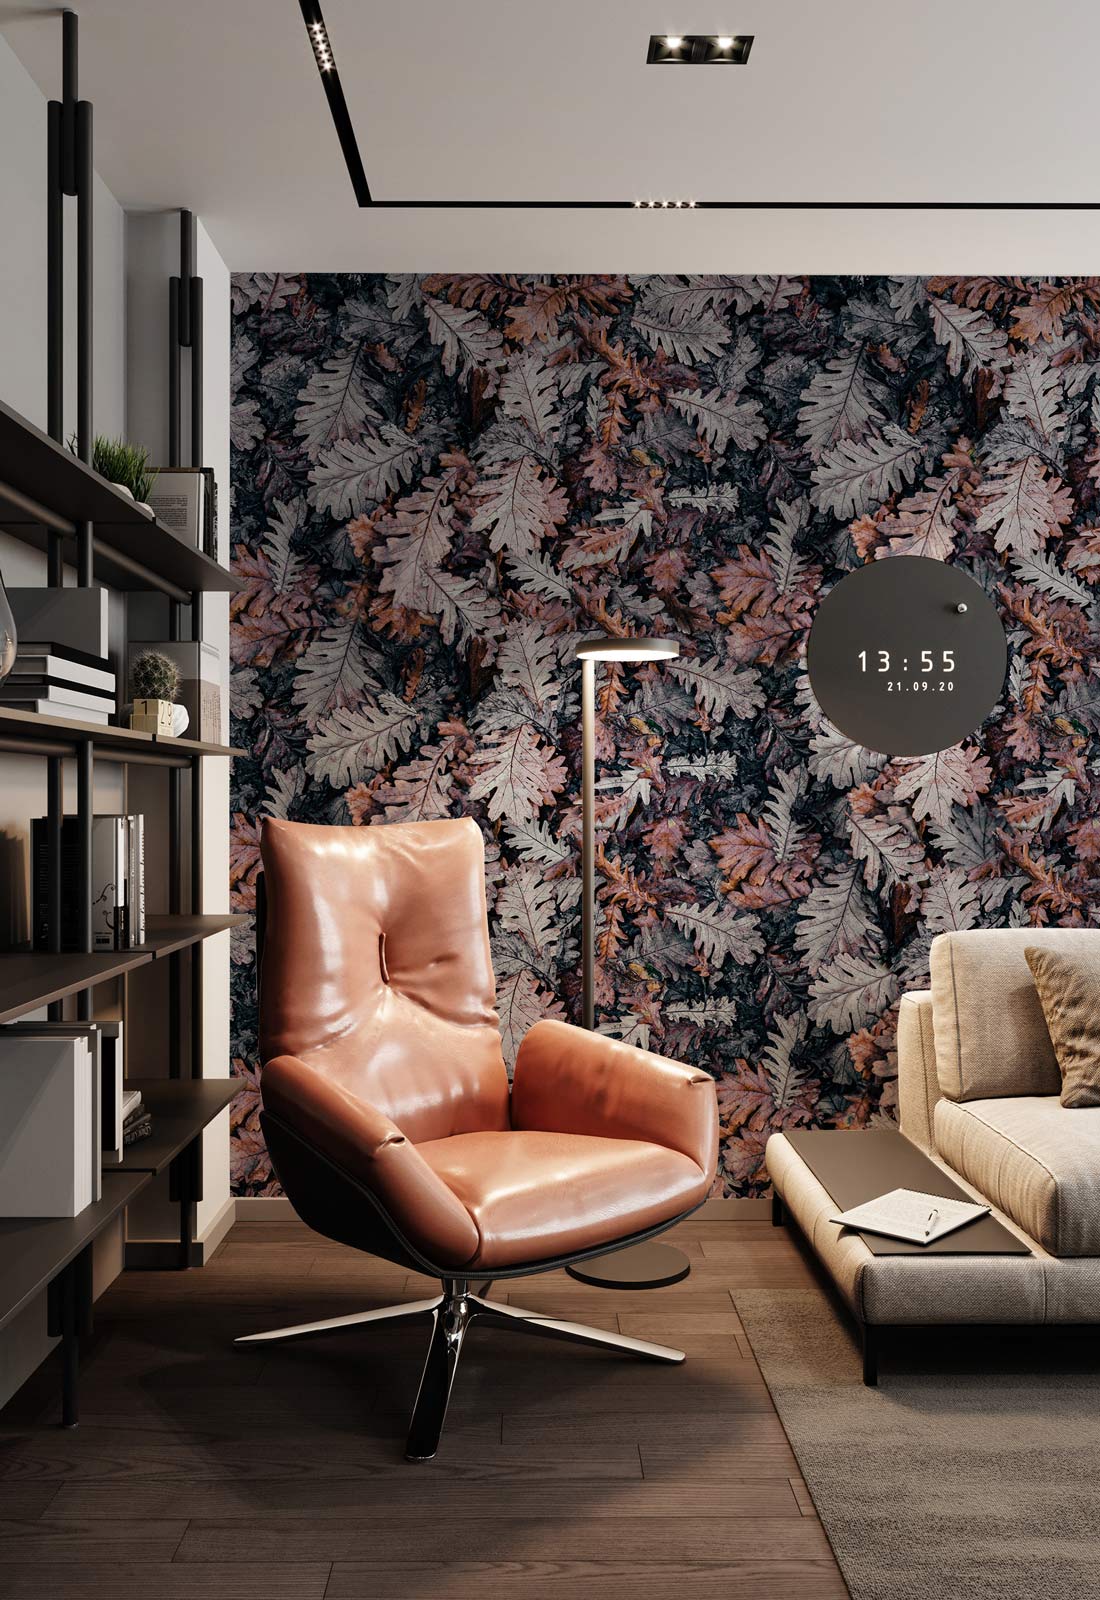 Decorate your living room with this beautiful wallpaper mural with dried leaves.